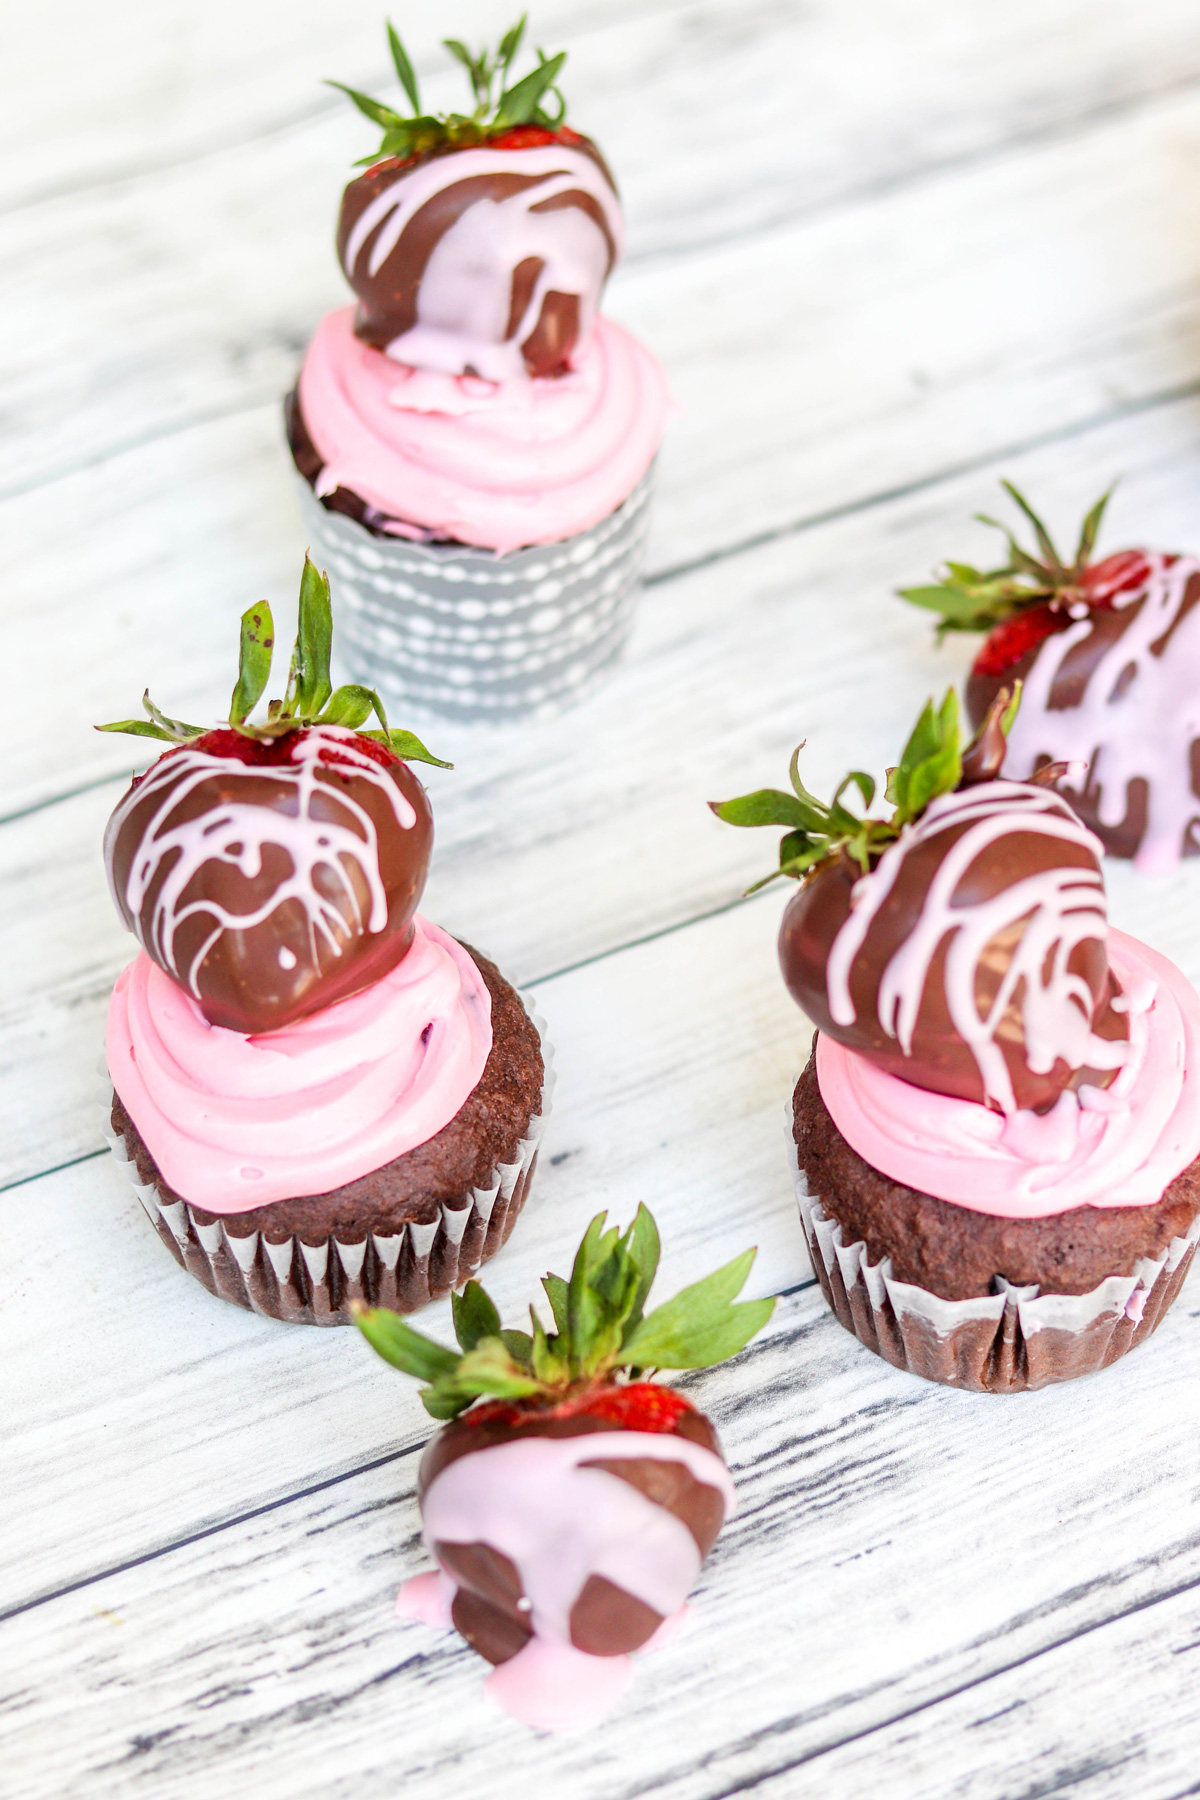 Chocolate Covered Strawberry Cupcakes Daily Dish Recipes 